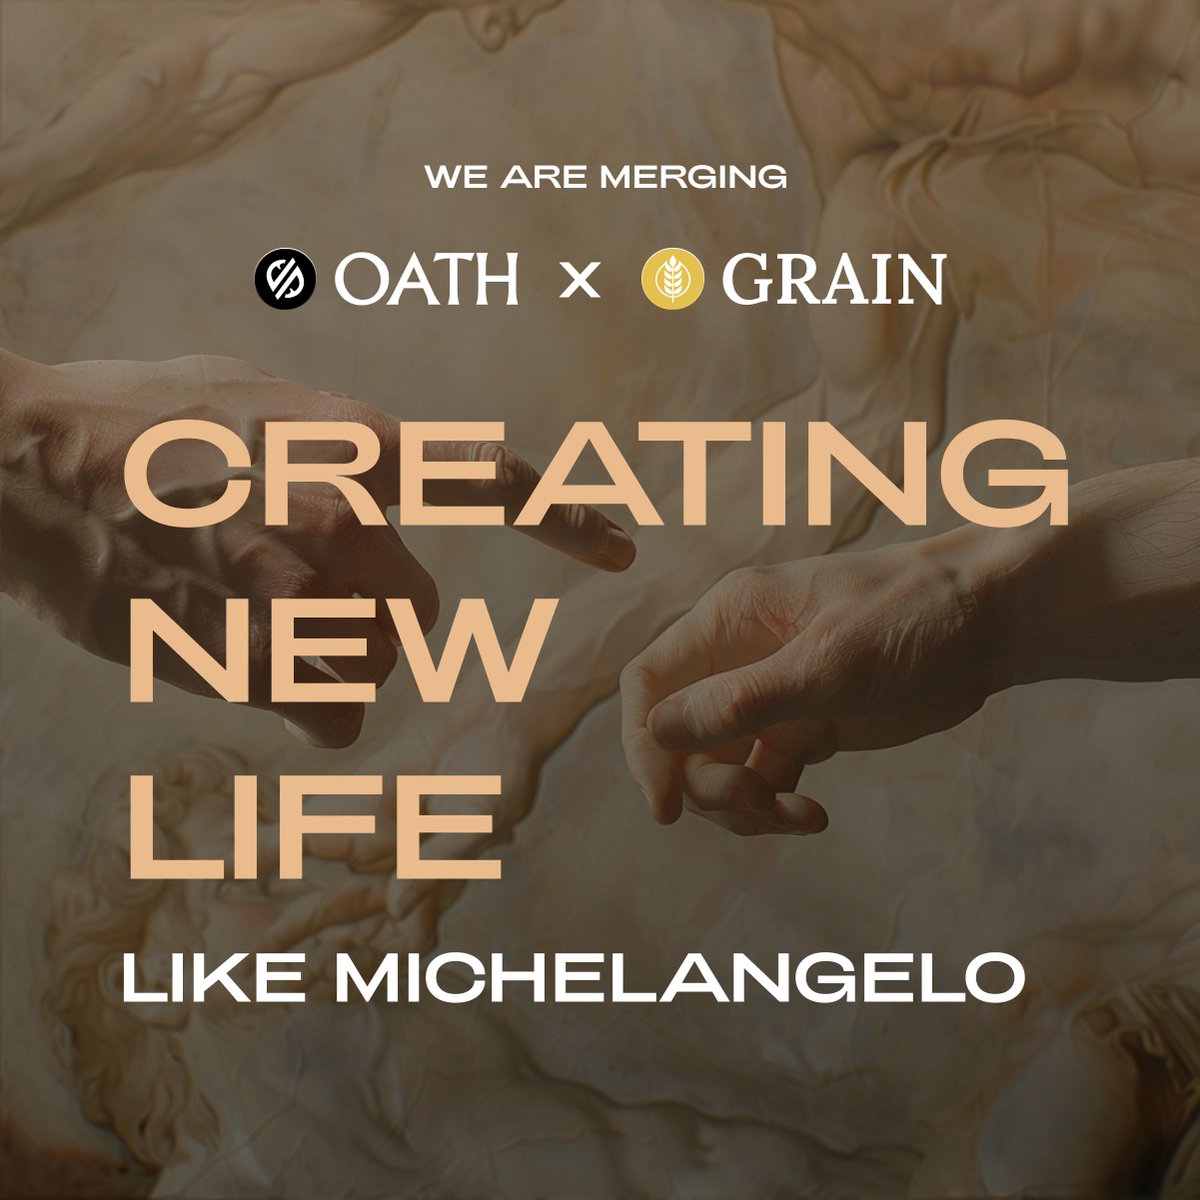 Why OATH and Grain?

By holding Grain and/or OATH you'll be participating in the emergence of something great. 

A new token which unlocks yield from more than just OATH and Grain's ecosystems. A token that delivers yield from every corner of DeFi.

Holders will have exclusive